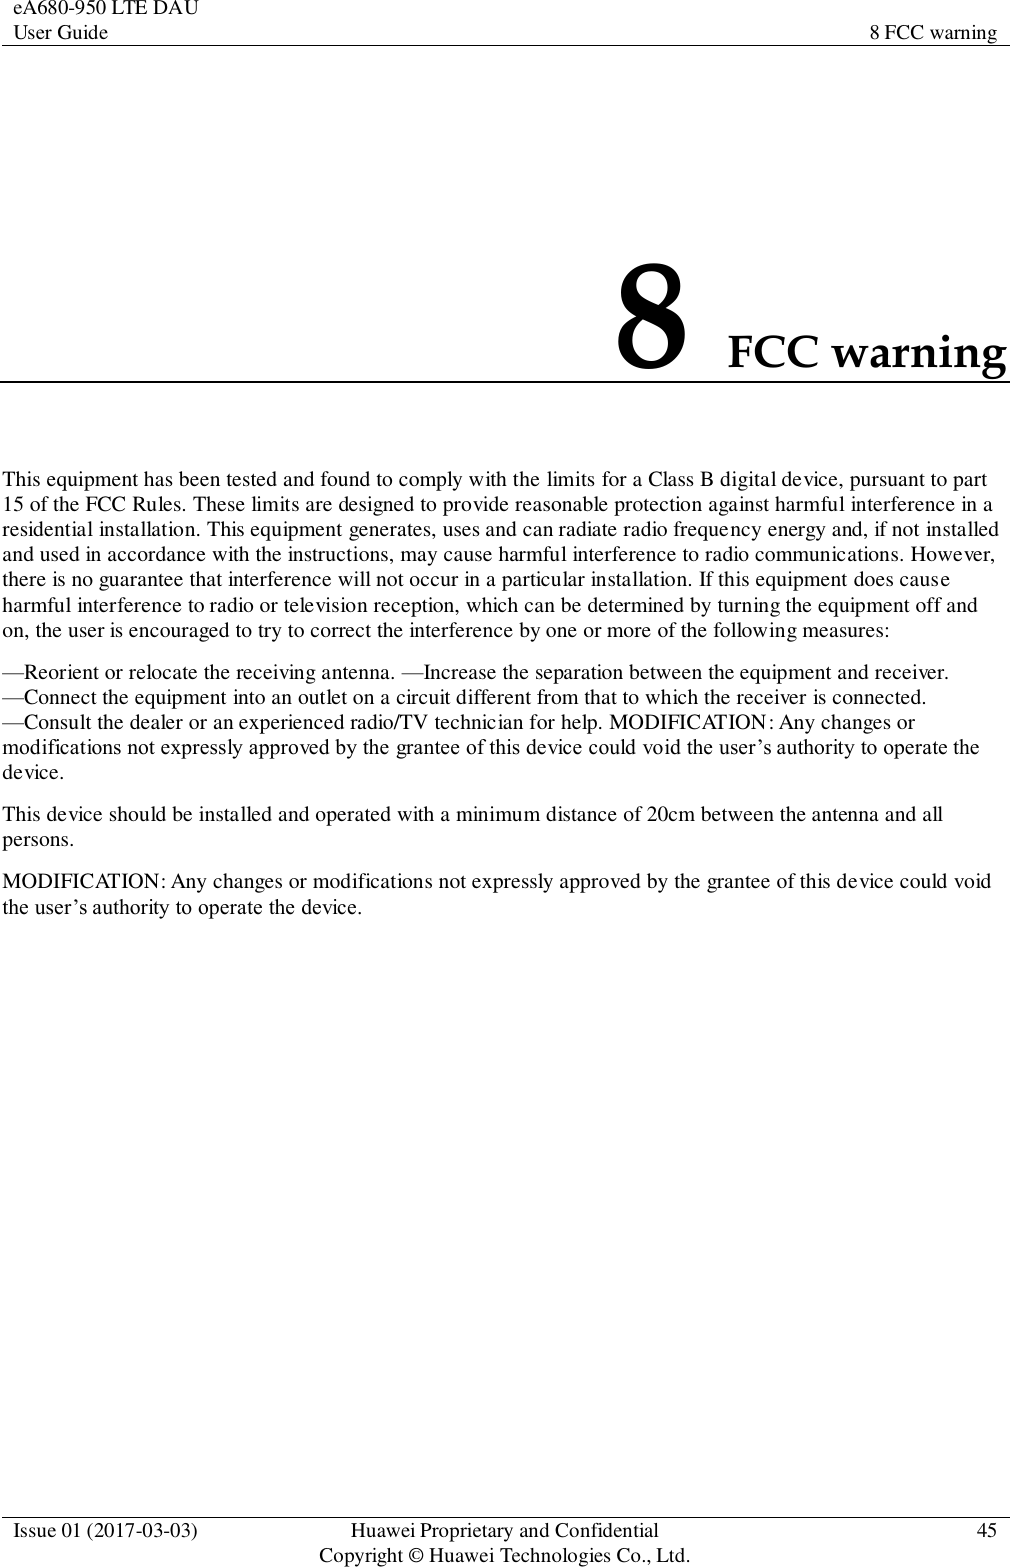 eA680-950 LTE DAU User Guide 8 FCC warning  Issue 01 (2017-03-03) Huawei Proprietary and Confidential                                     Copyright © Huawei Technologies Co., Ltd. 45  8 FCC warning This equipment has been tested and found to comply with the limits for a Class B digital device, pursuant to part 15 of the FCC Rules. These limits are designed to provide reasonable protection against harmful interference in a residential installation. This equipment generates, uses and can radiate radio frequency energy and, if not installed and used in accordance with the instructions, may cause harmful interference to radio communications. However, there is no guarantee that interference will not occur in a particular installation. If this equipment does cause harmful interference to radio or television reception, which can be determined by turning the equipment off and on, the user is encouraged to try to correct the interference by one or more of the following measures:   —Reorient or relocate the receiving antenna. —Increase the separation between the equipment and receiver. —Connect the equipment into an outlet on a circuit different from that to which the receiver is connected. —Consult the dealer or an experienced radio/TV technician for help. MODIFICATION: Any changes or modifications not expressly approved by the grantee of this device could void the user’s authority to operate the device.   This device should be installed and operated with a minimum distance of 20cm between the antenna and all persons. MODIFICATION: Any changes or modifications not expressly approved by the grantee of this device could void the user’s authority to operate the device. 